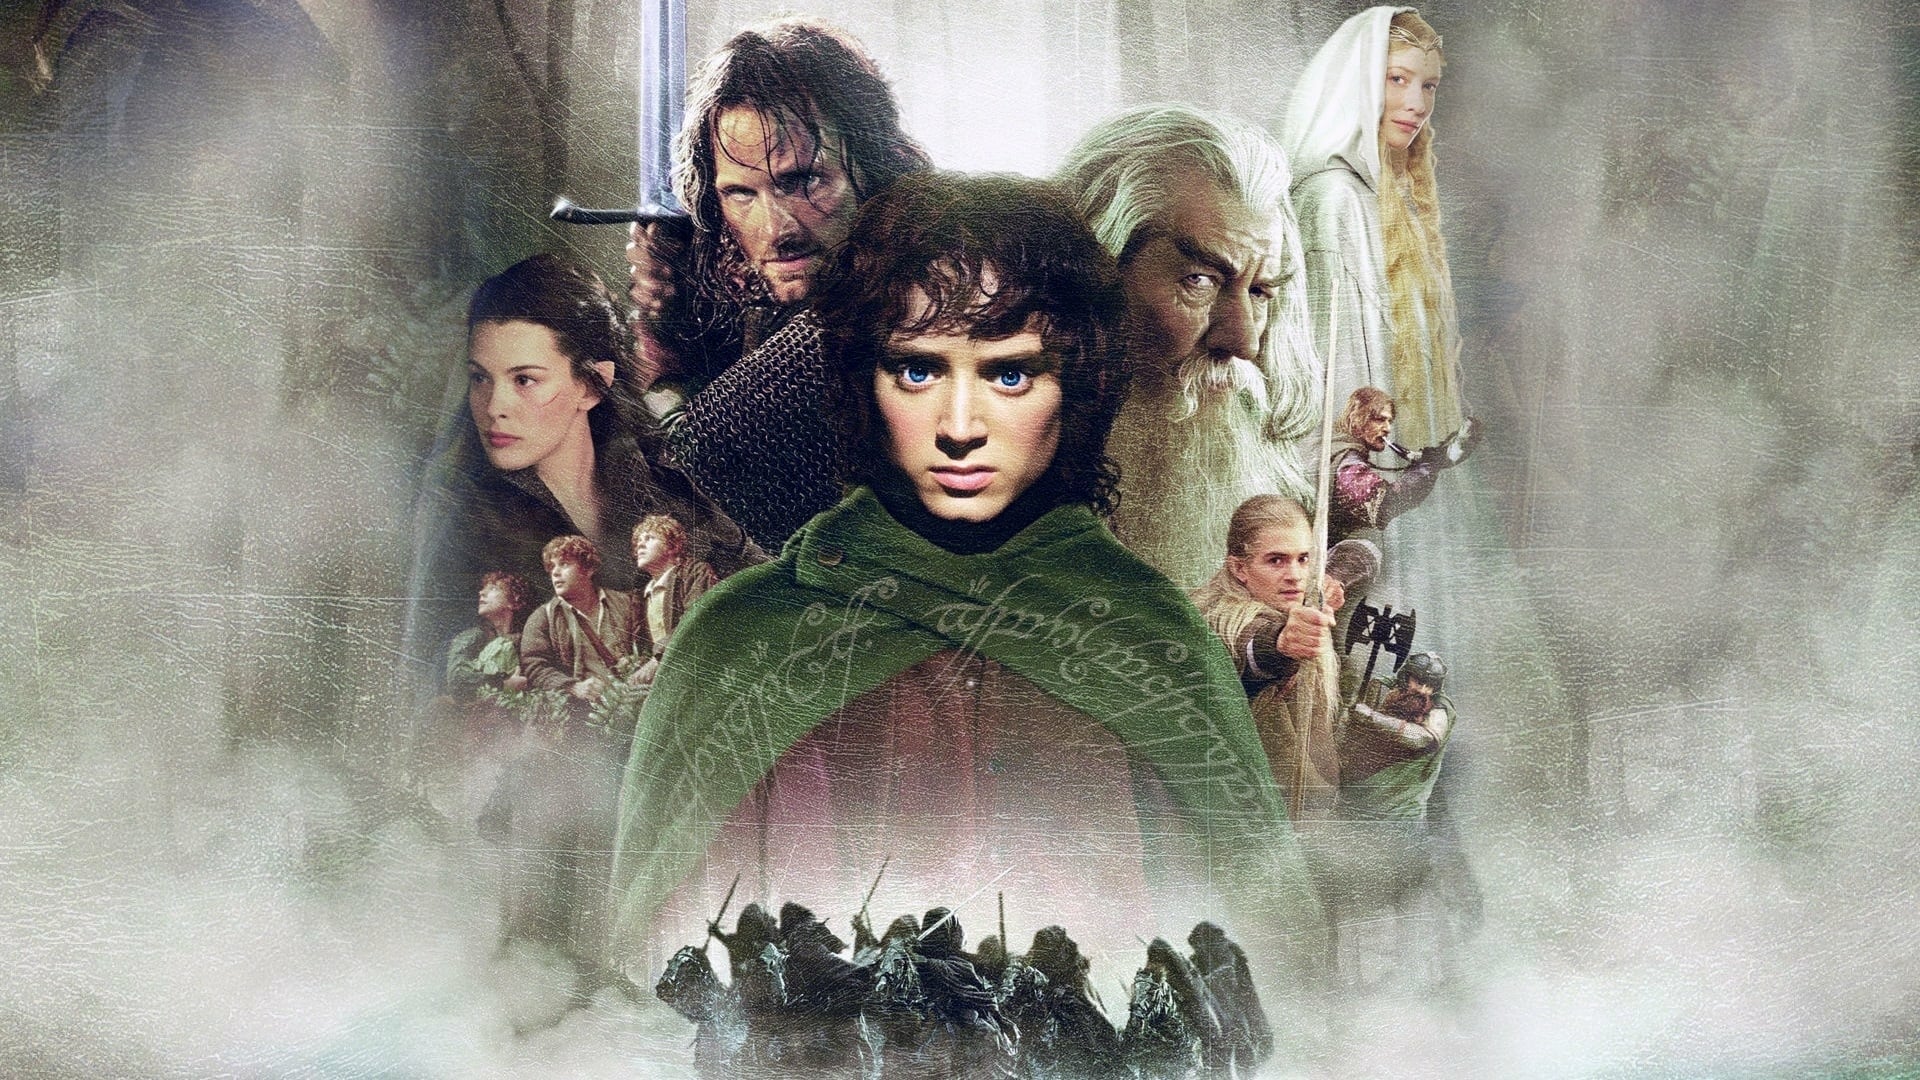 The Lord of the Rings: The Fellowship of the Ring MOVIE Teaser (Lord of the  Rings Trilogy) - HD 